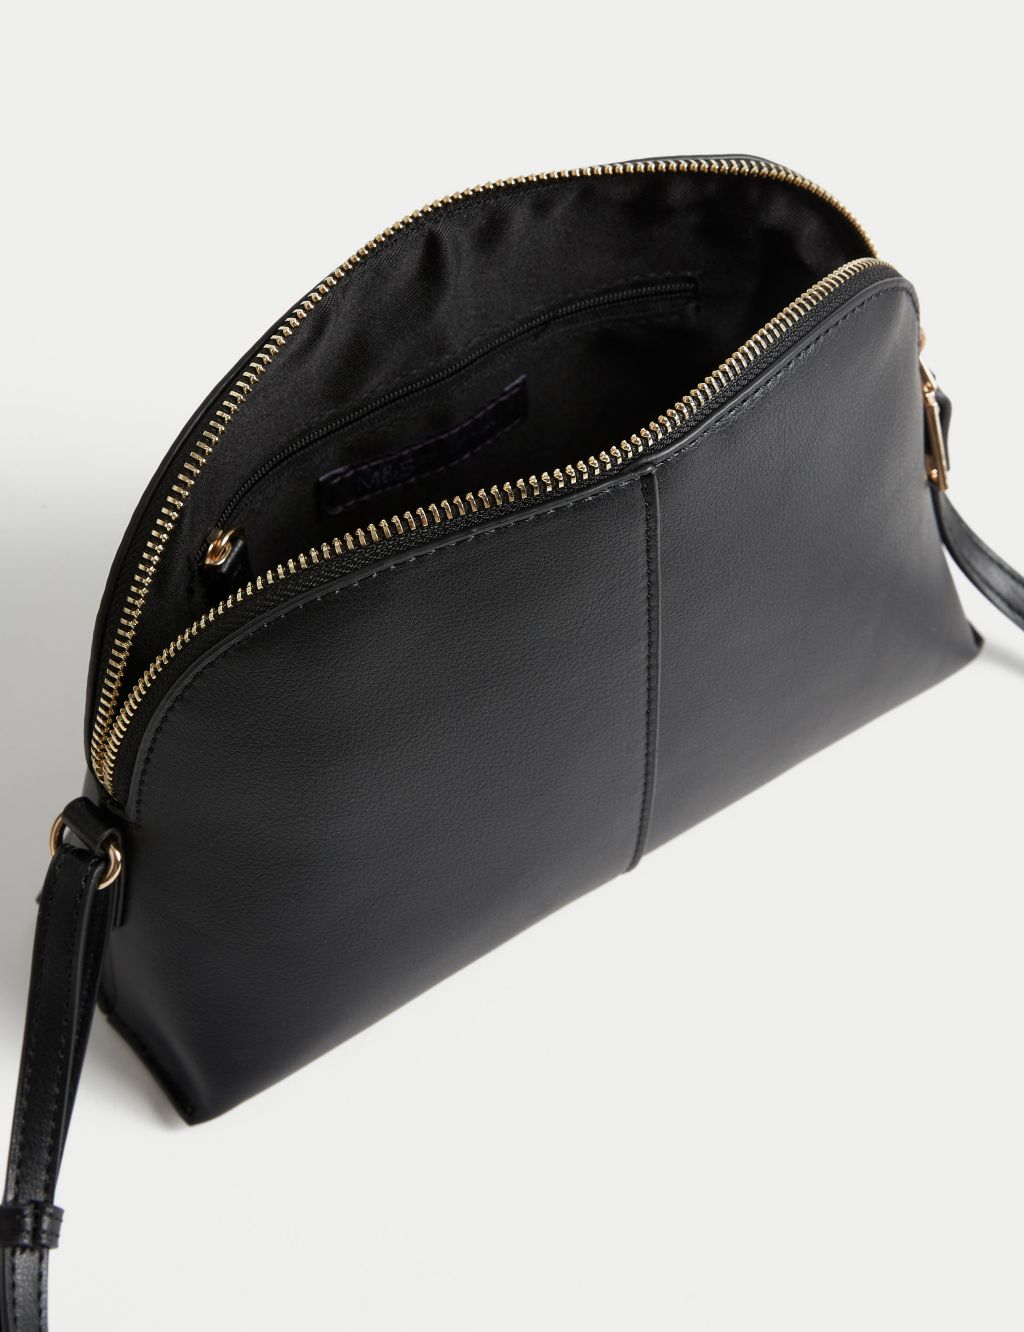 Faux Leather Cross Body Bag image 4